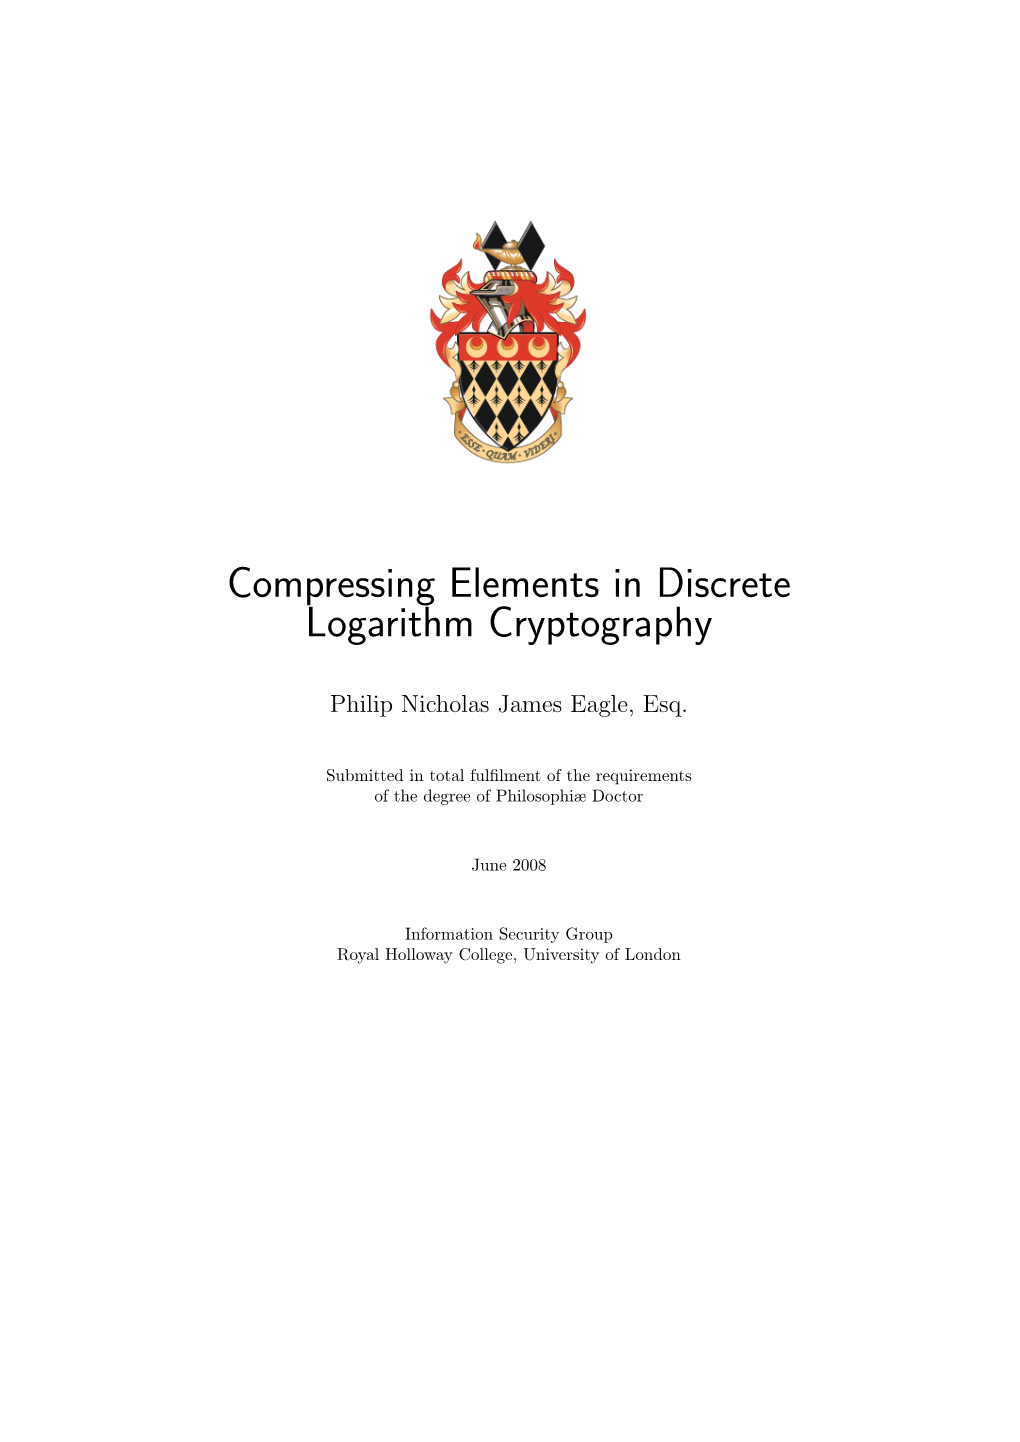 Compressing Elements in Discrete Logarithm Cryptography